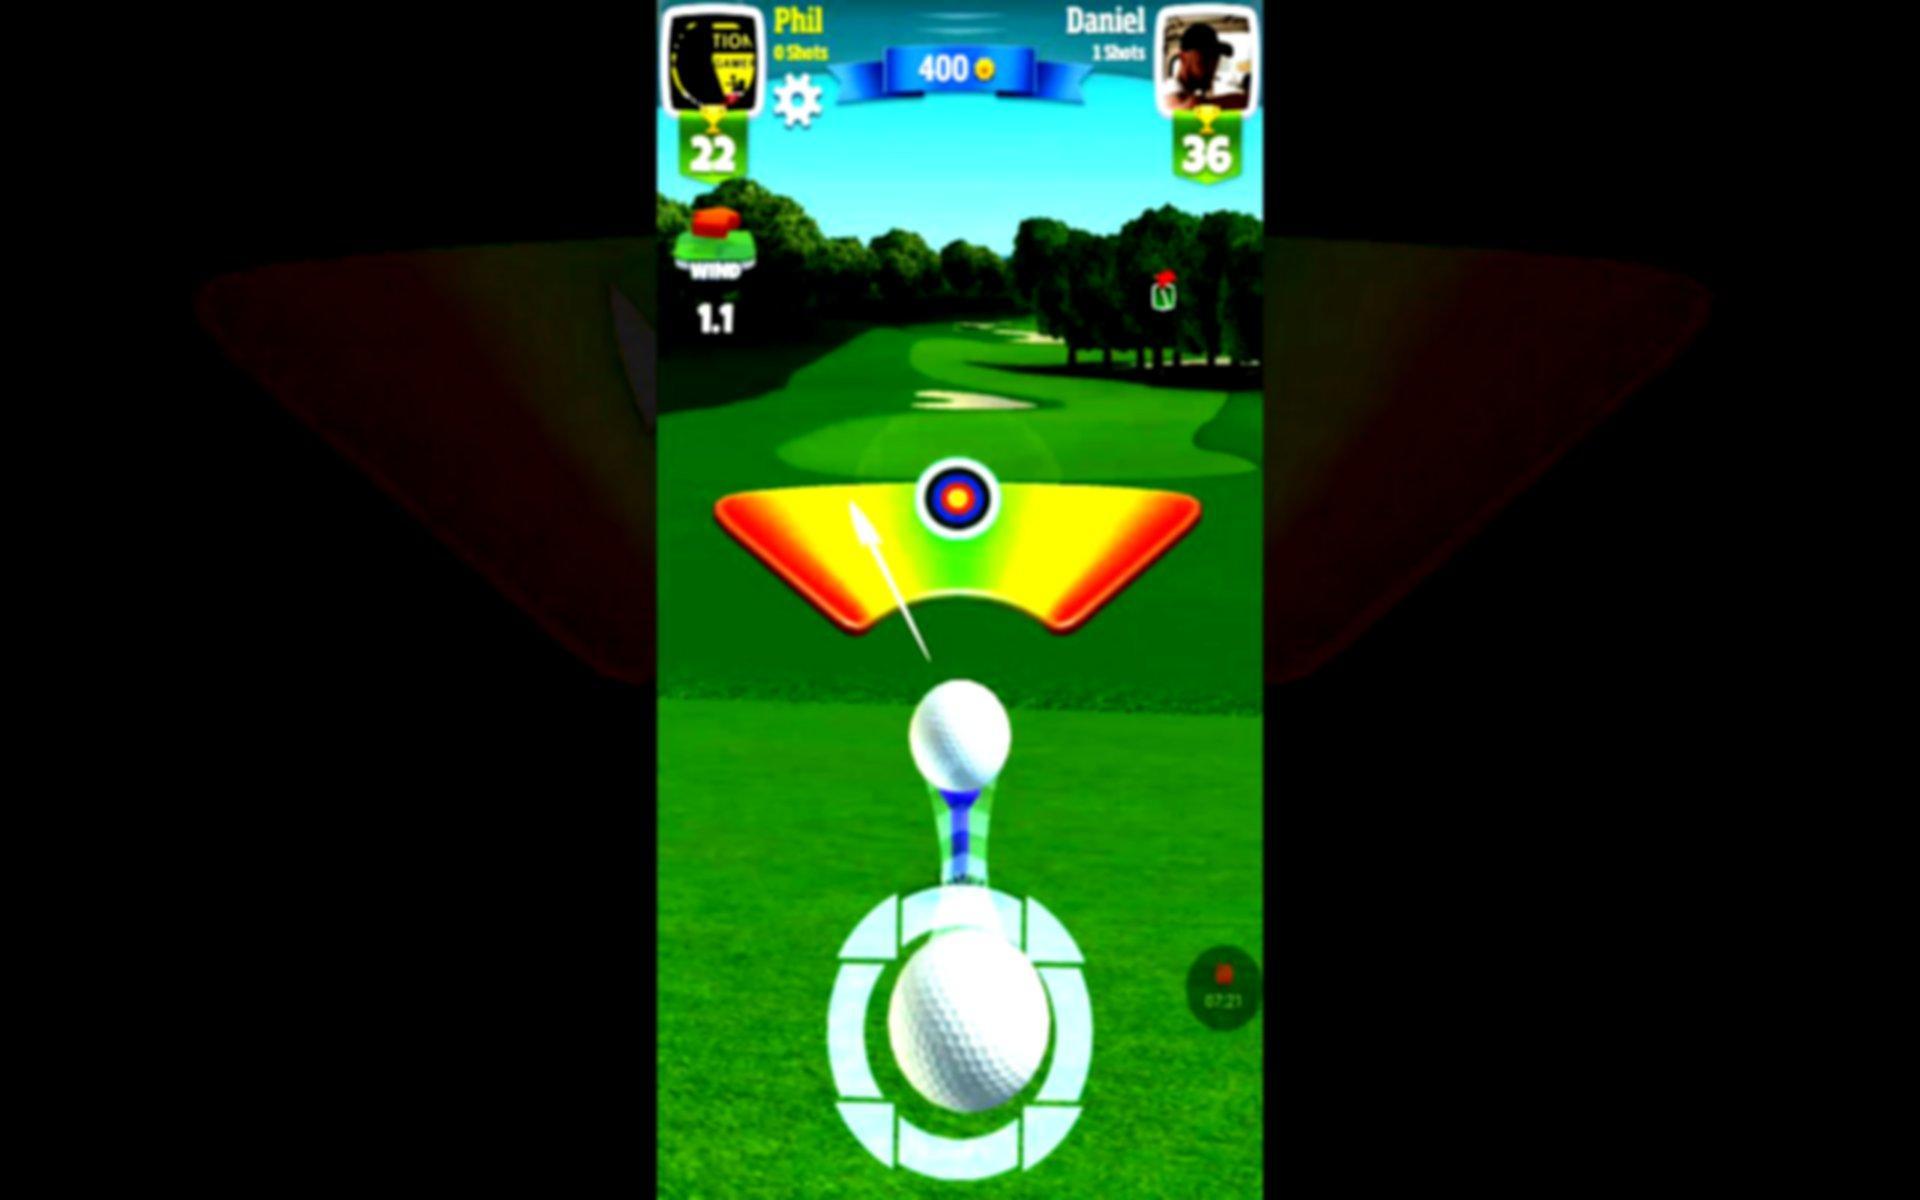 Golf Clash Guide 2018 for Android - APK Download